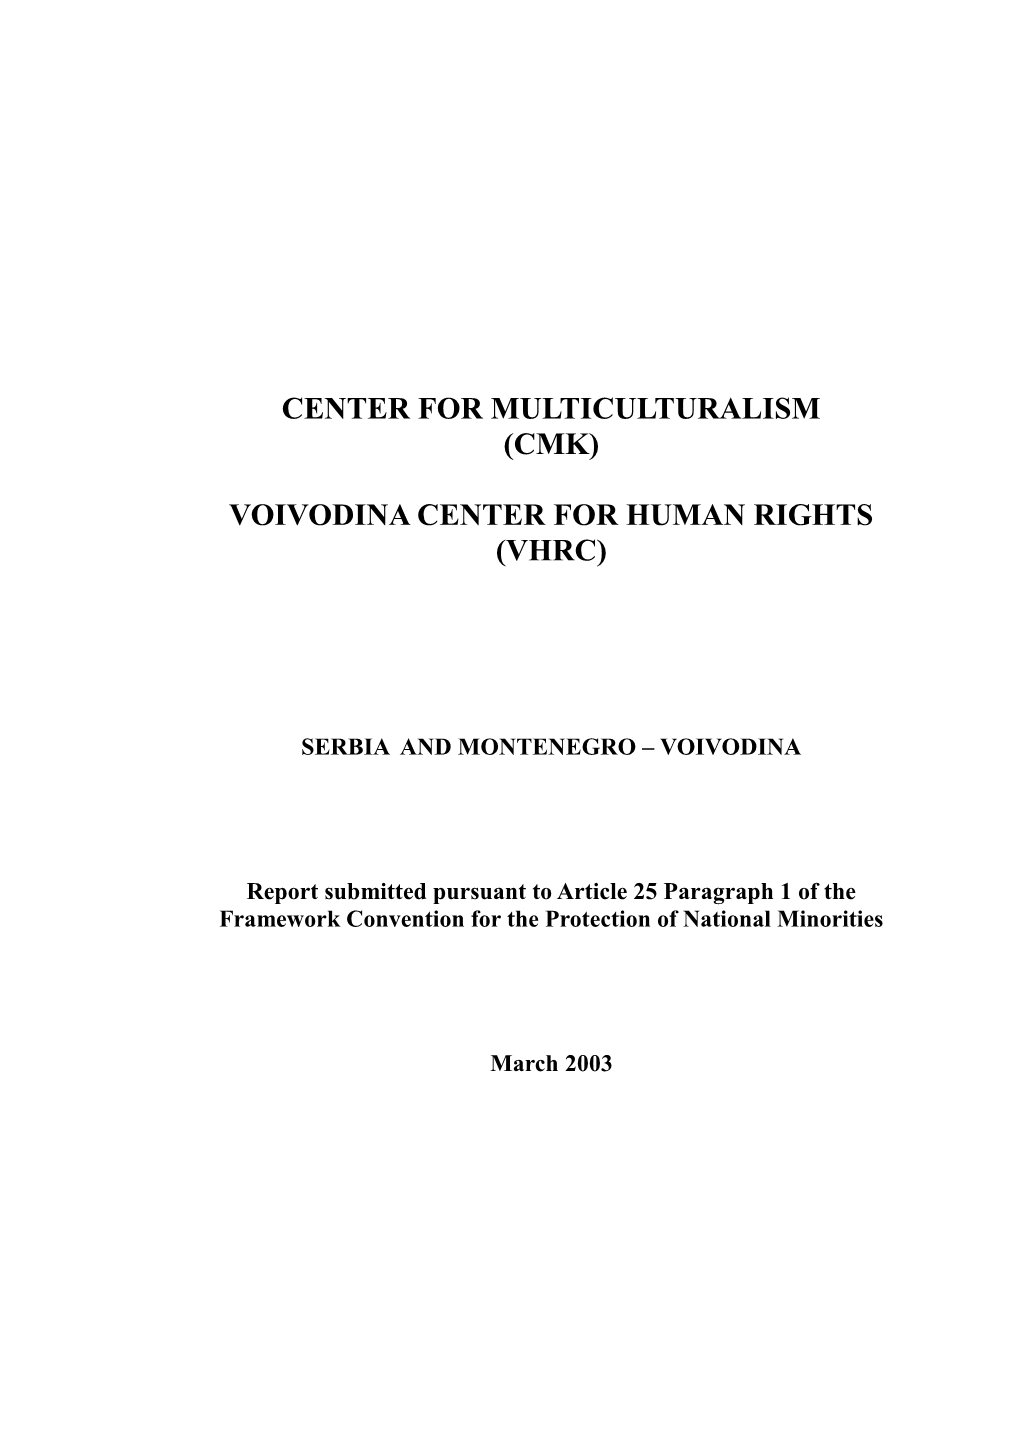 Voivodina Center for Human Rights (Vhrc)